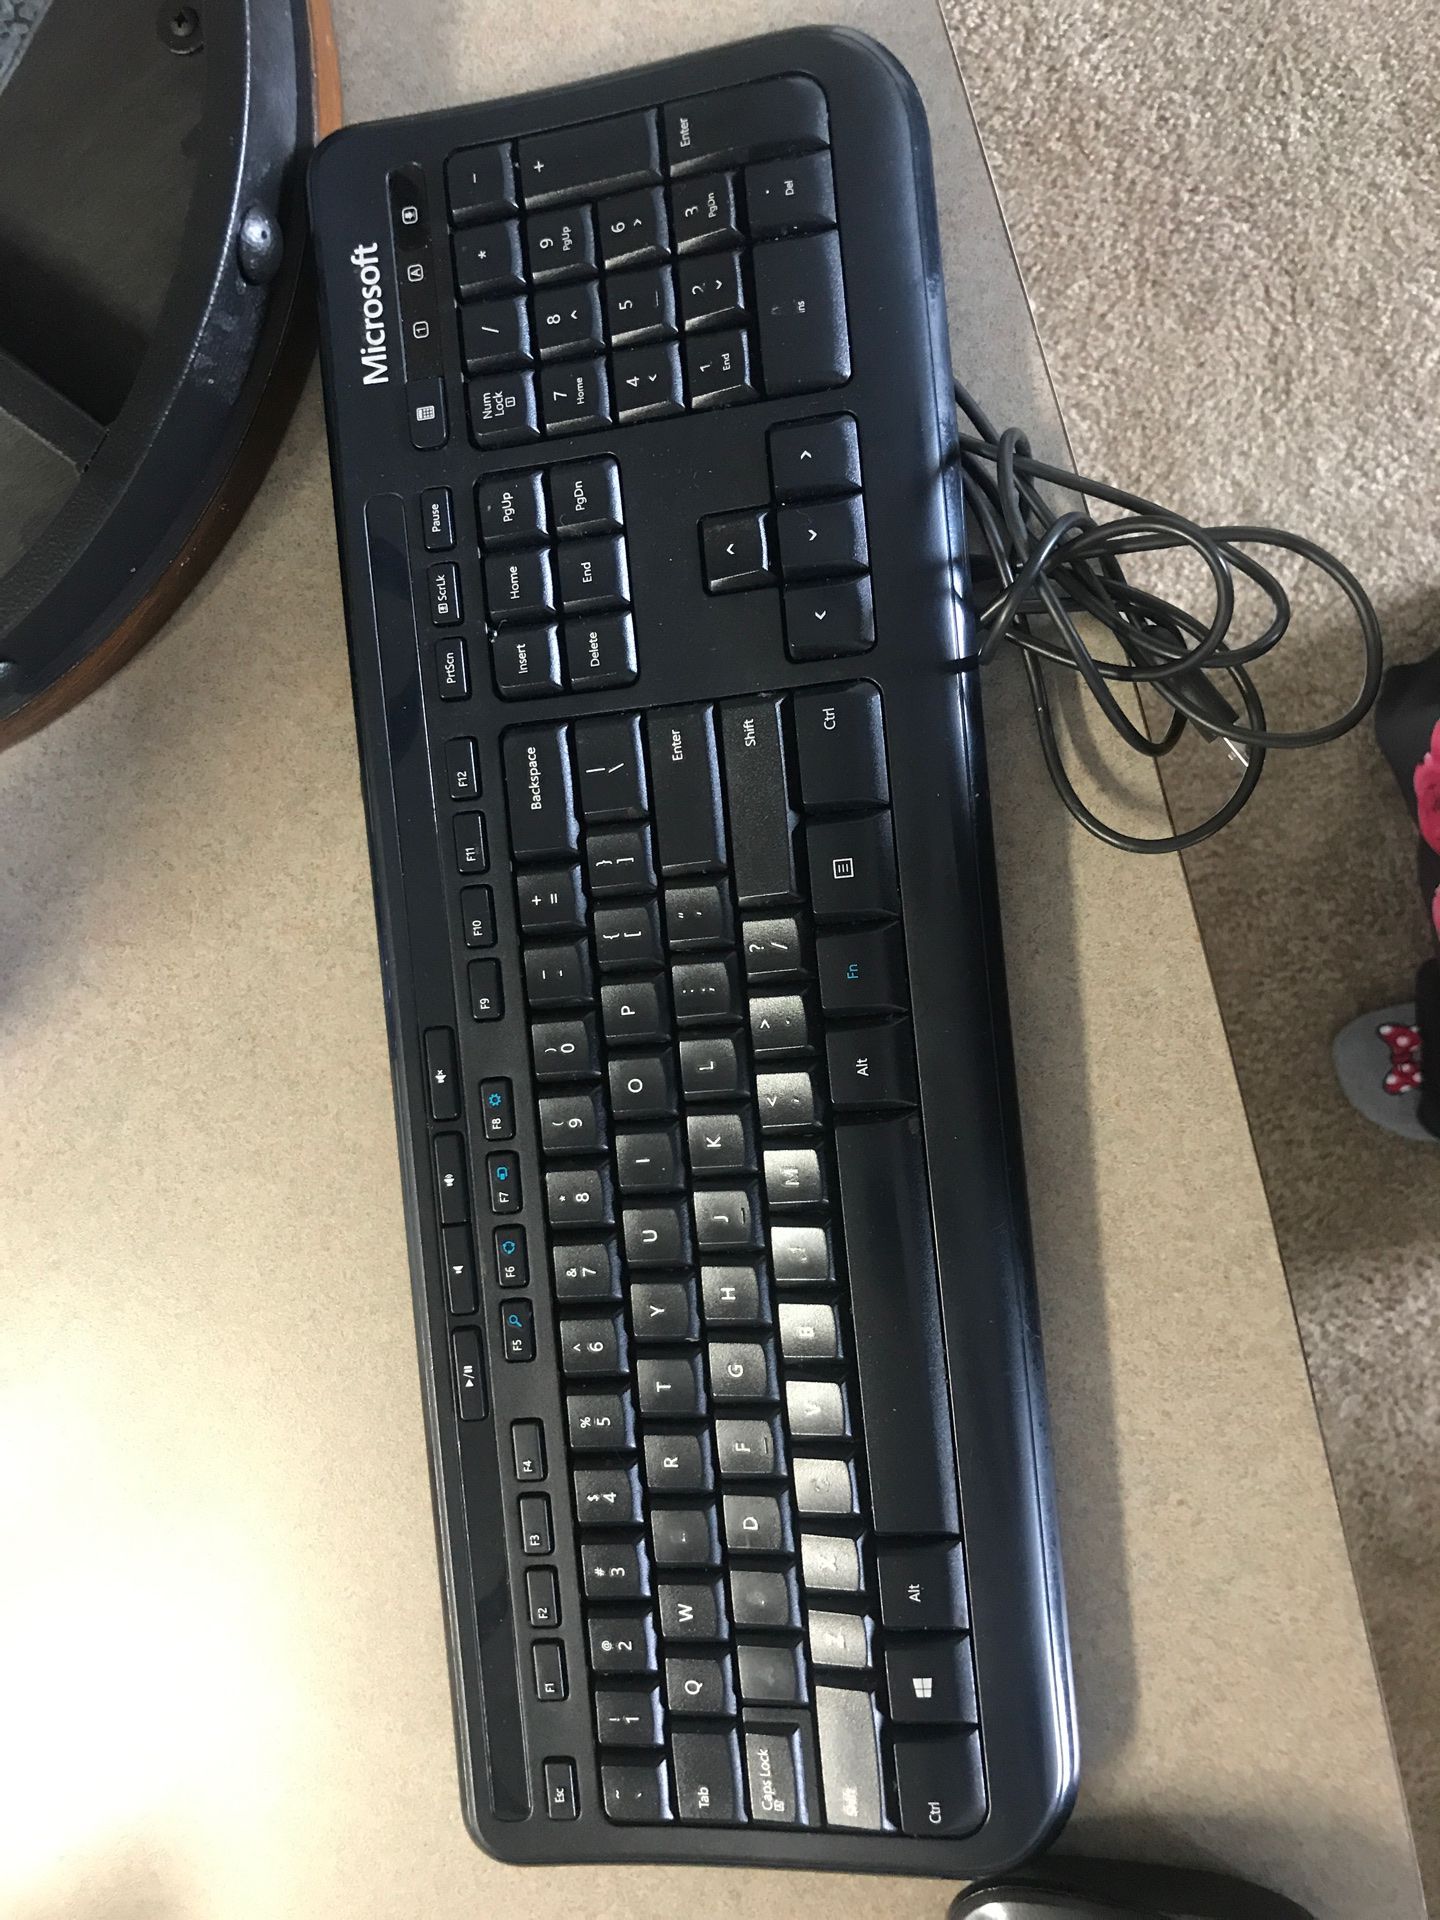 Keyboard and wireless mouse